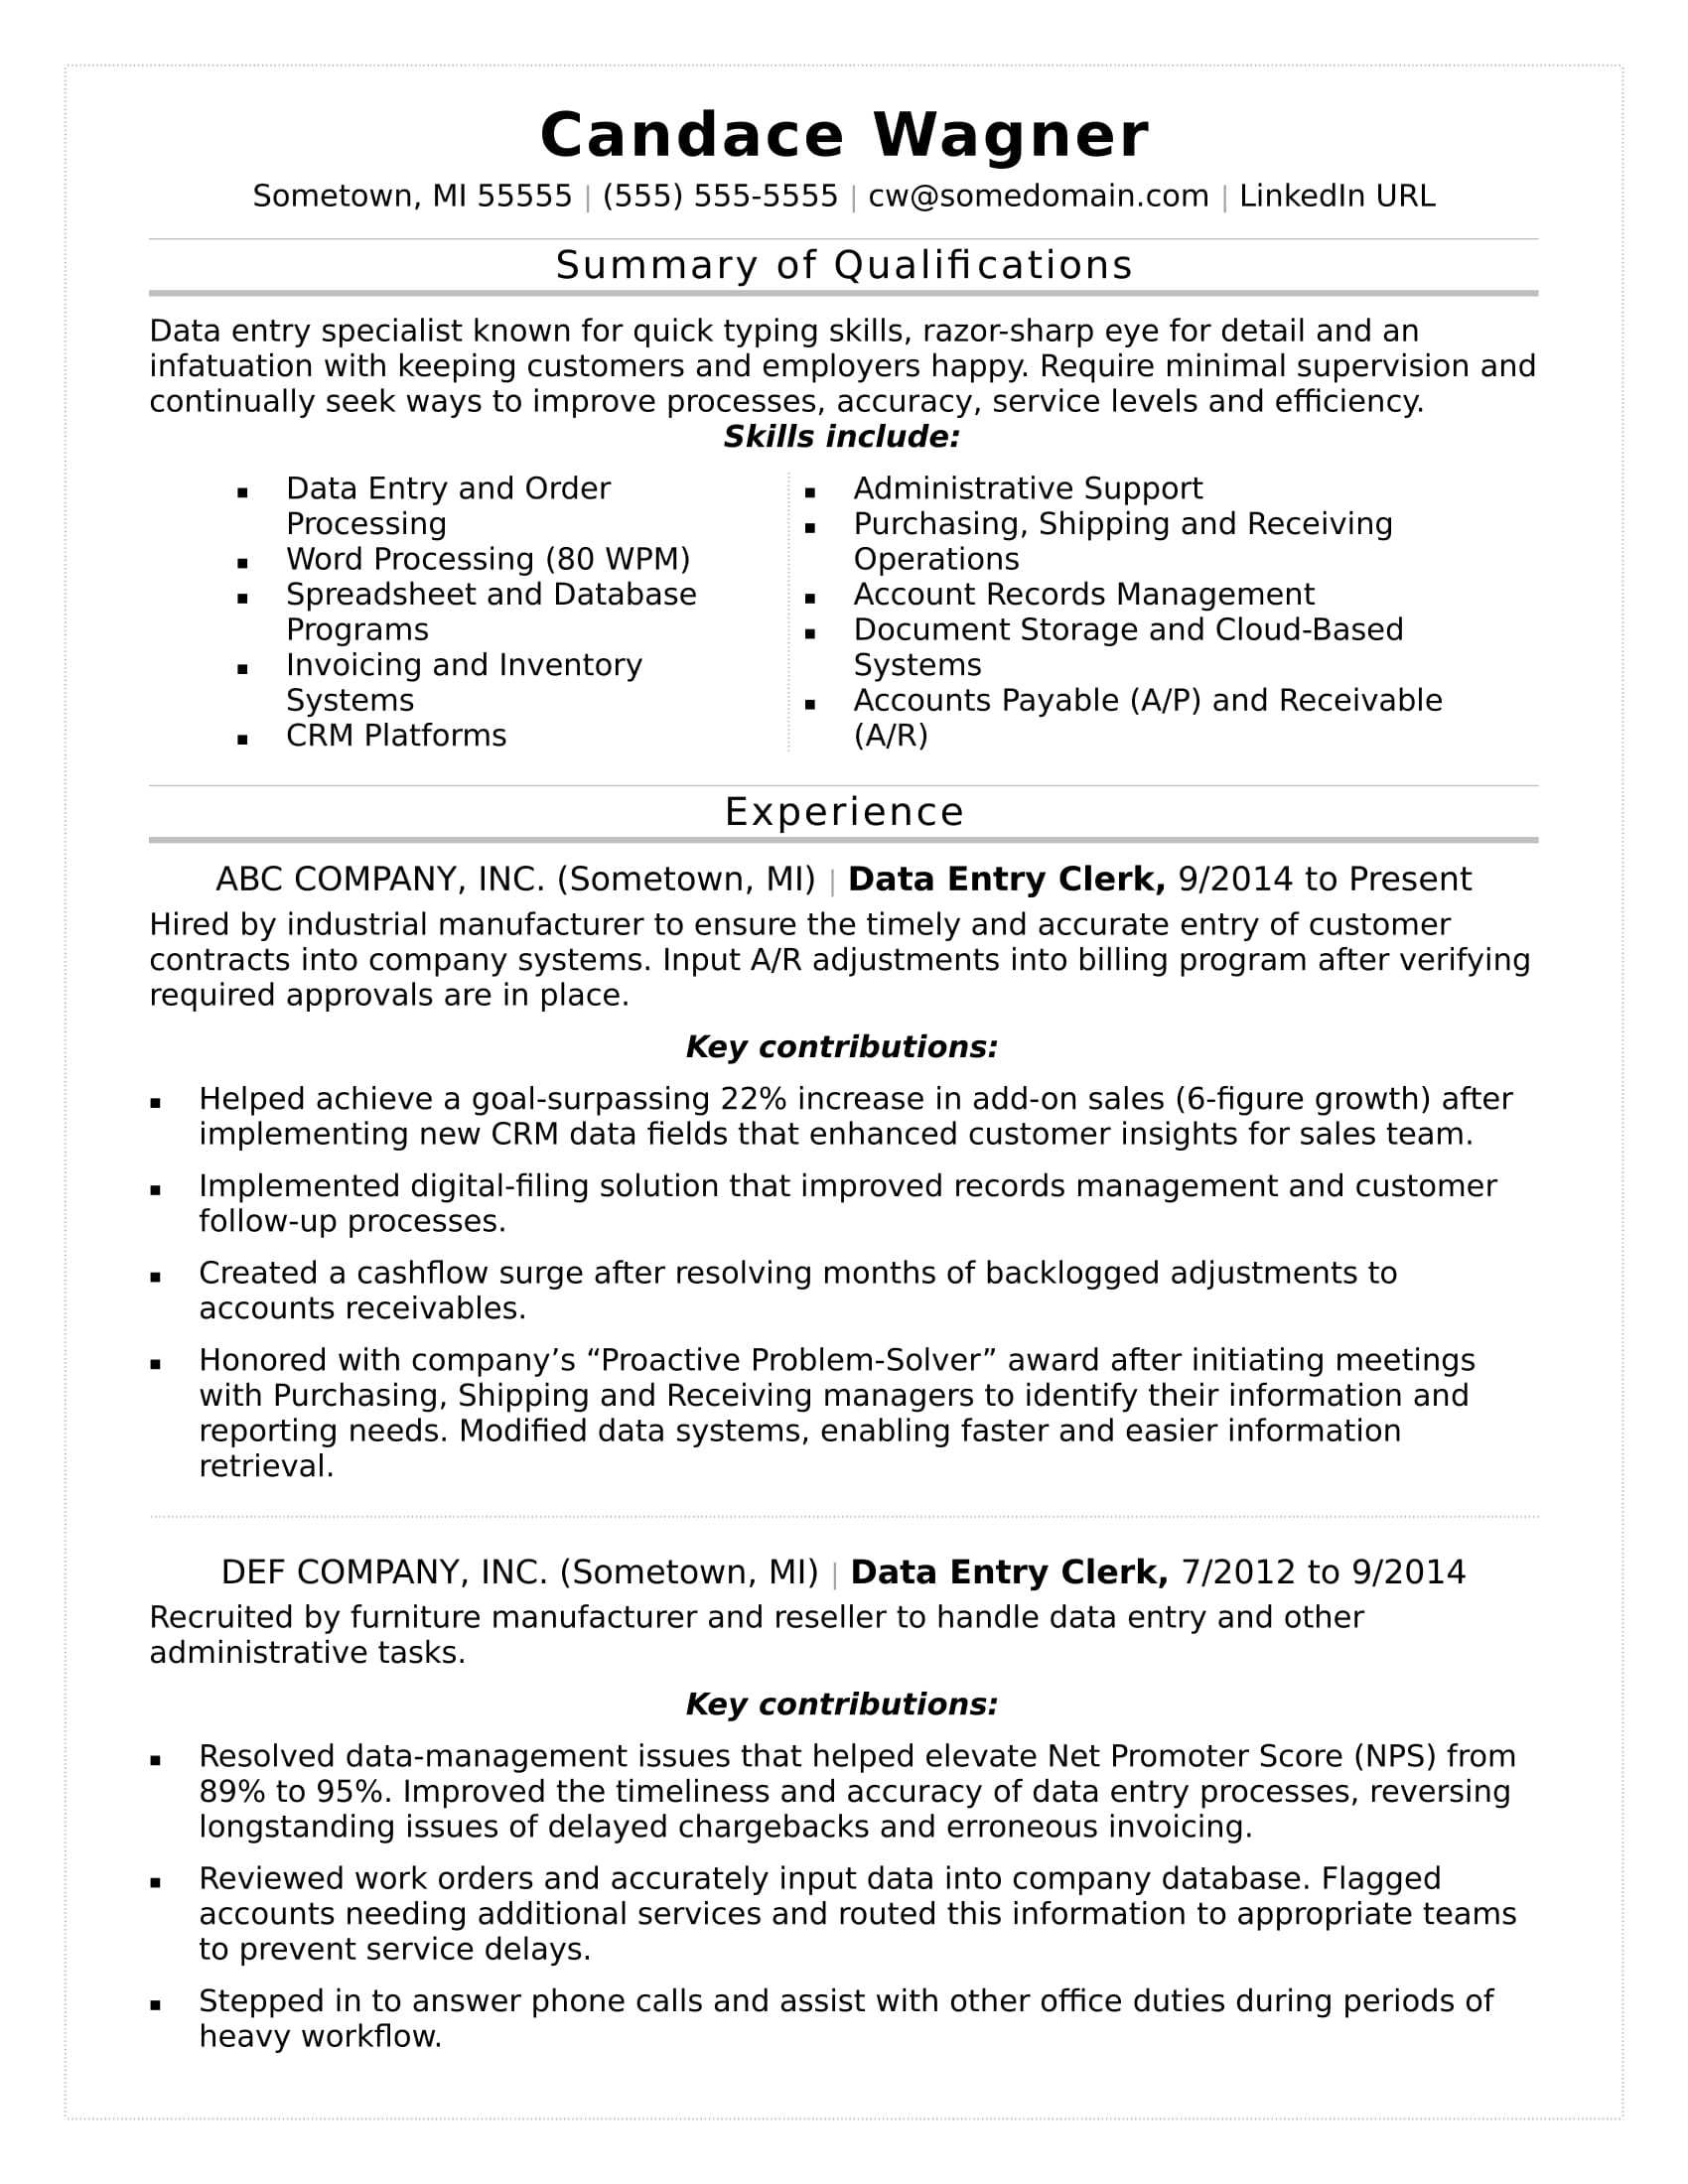 Data Entry Resume Sample | Monster Throughout How To Find A Resume Template On Word